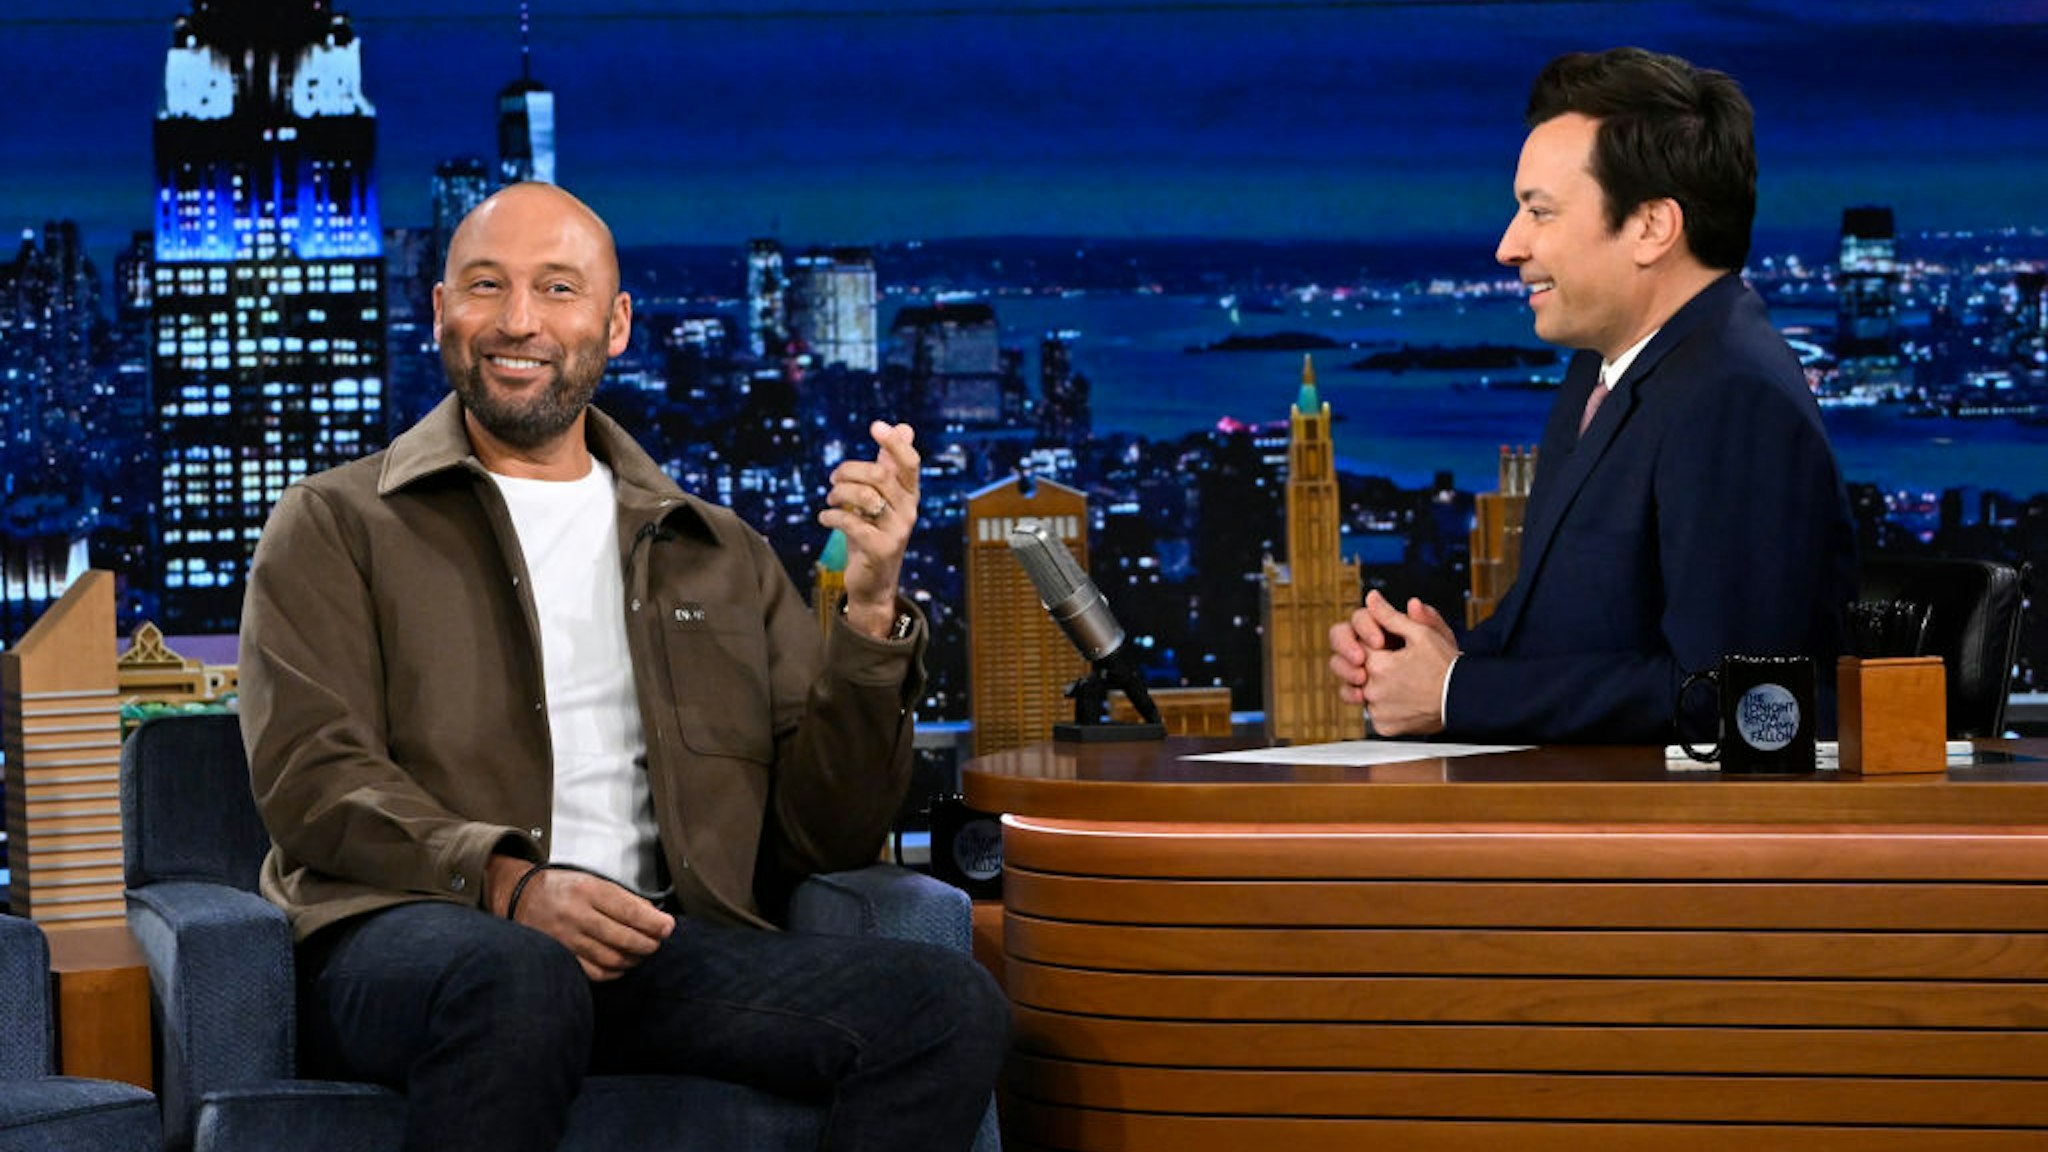 THE TONIGHT SHOW STARRING JIMMY FALLON -- Episode 1790 -- Pictured: (l-r) Businessman/former baseball player Derek Jeter during an interview with host Jimmy Fallon on Wednesday, February 1, 2023 -- (Photo by: Todd Owyoung/NBC via Getty Images)